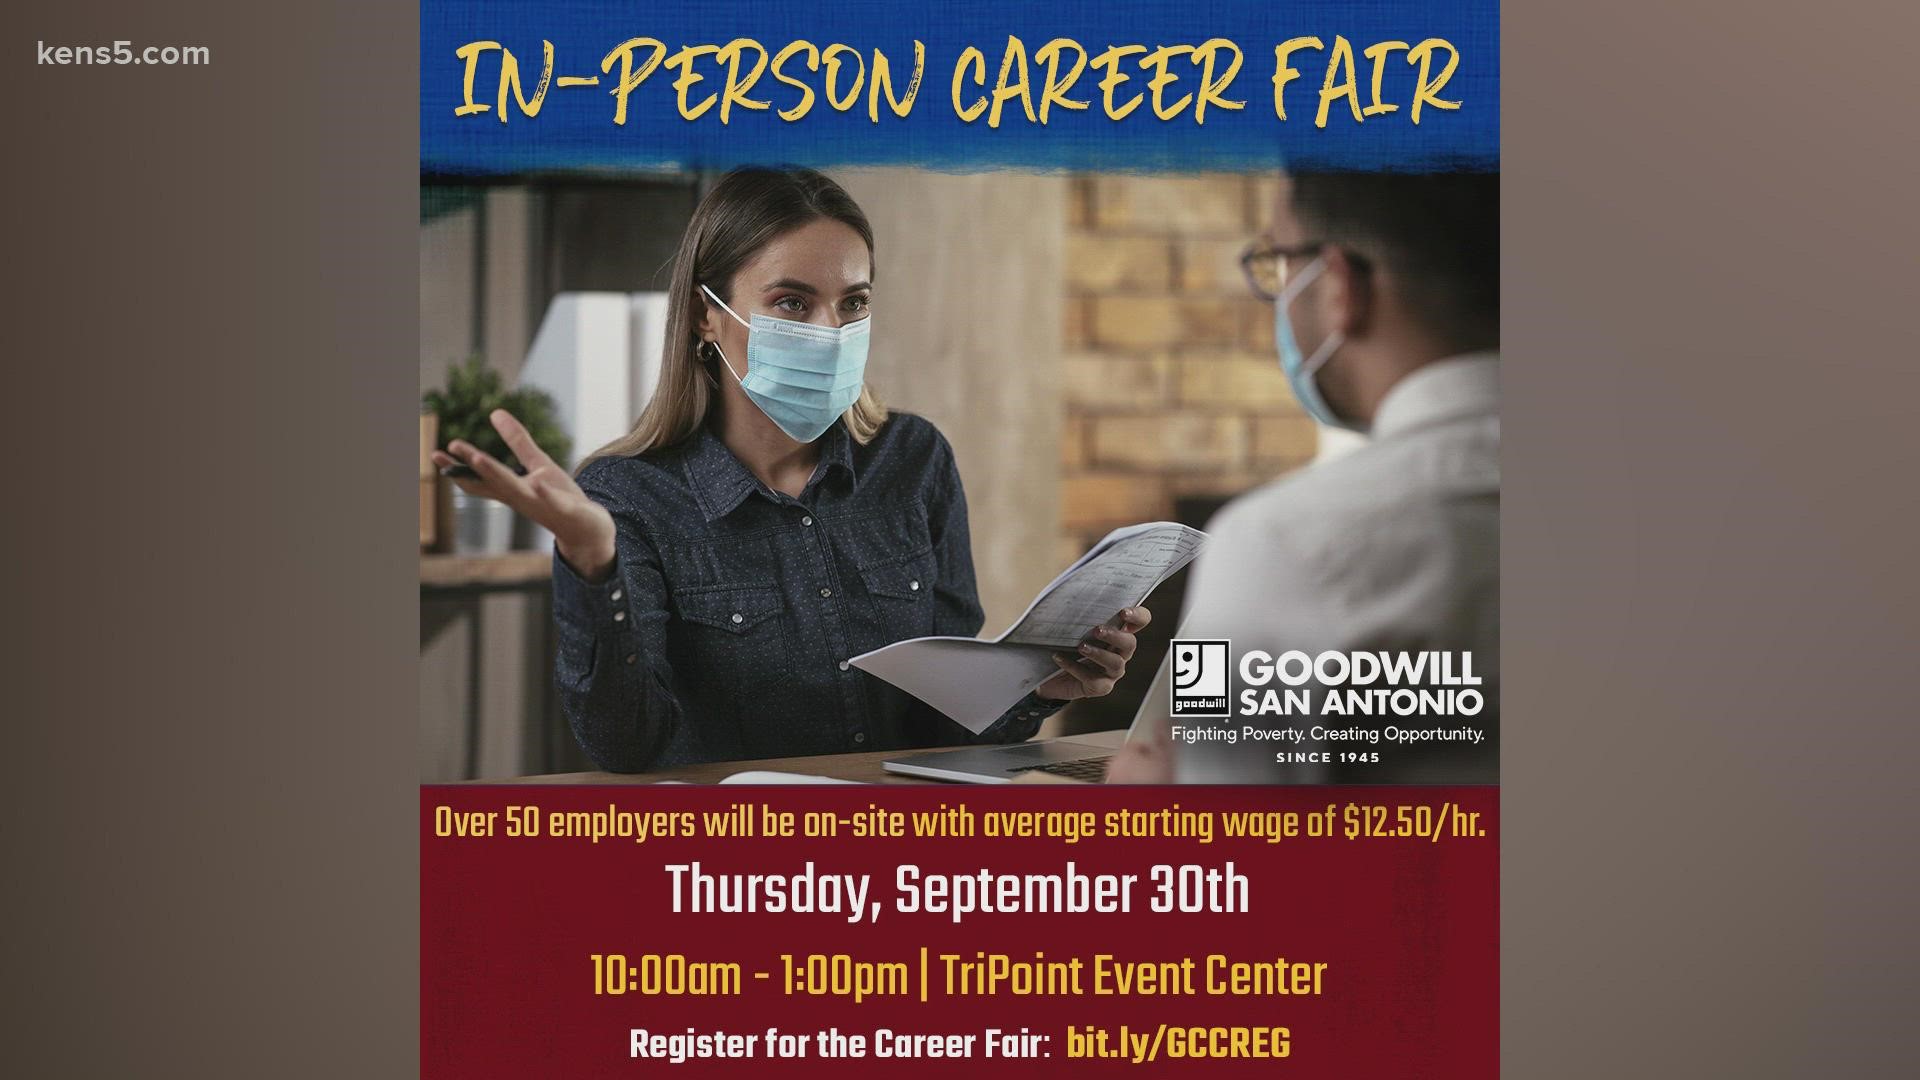 If you or someone you know is in need of a job, here's a career fair you can look into.